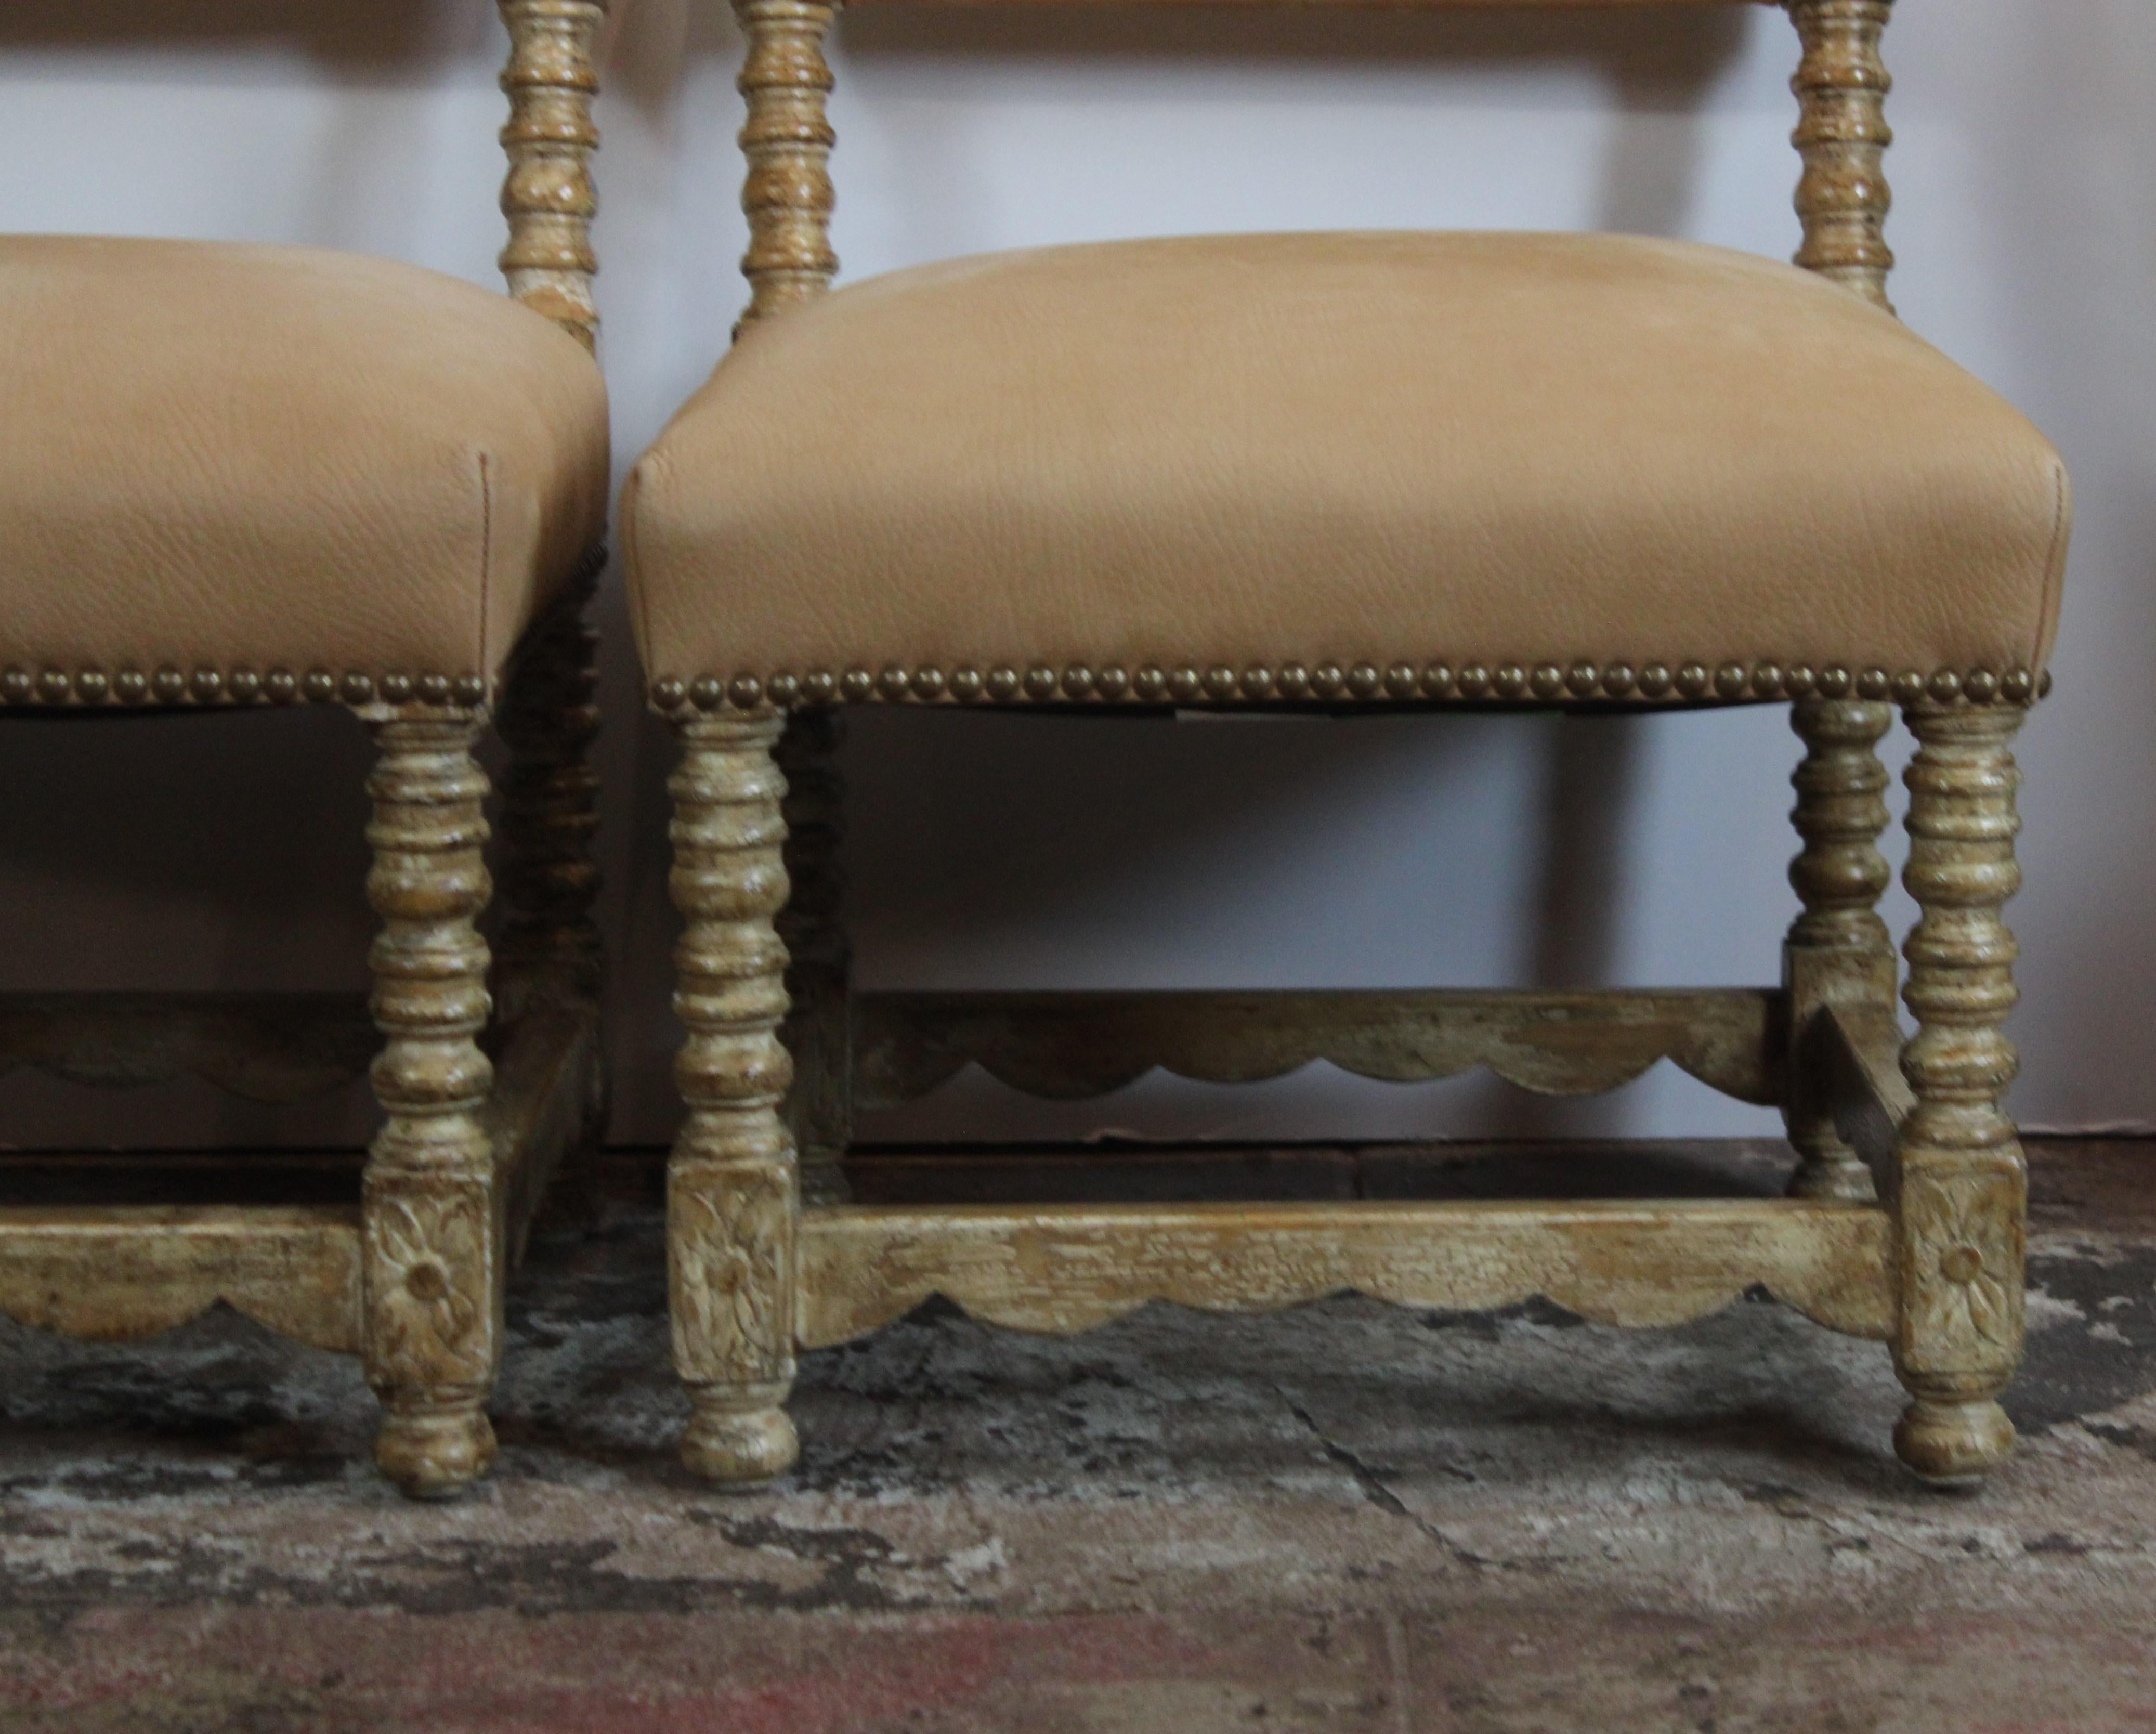 Pair of low Spanish style chairs. Carved wood frame. Upholstered in suede.